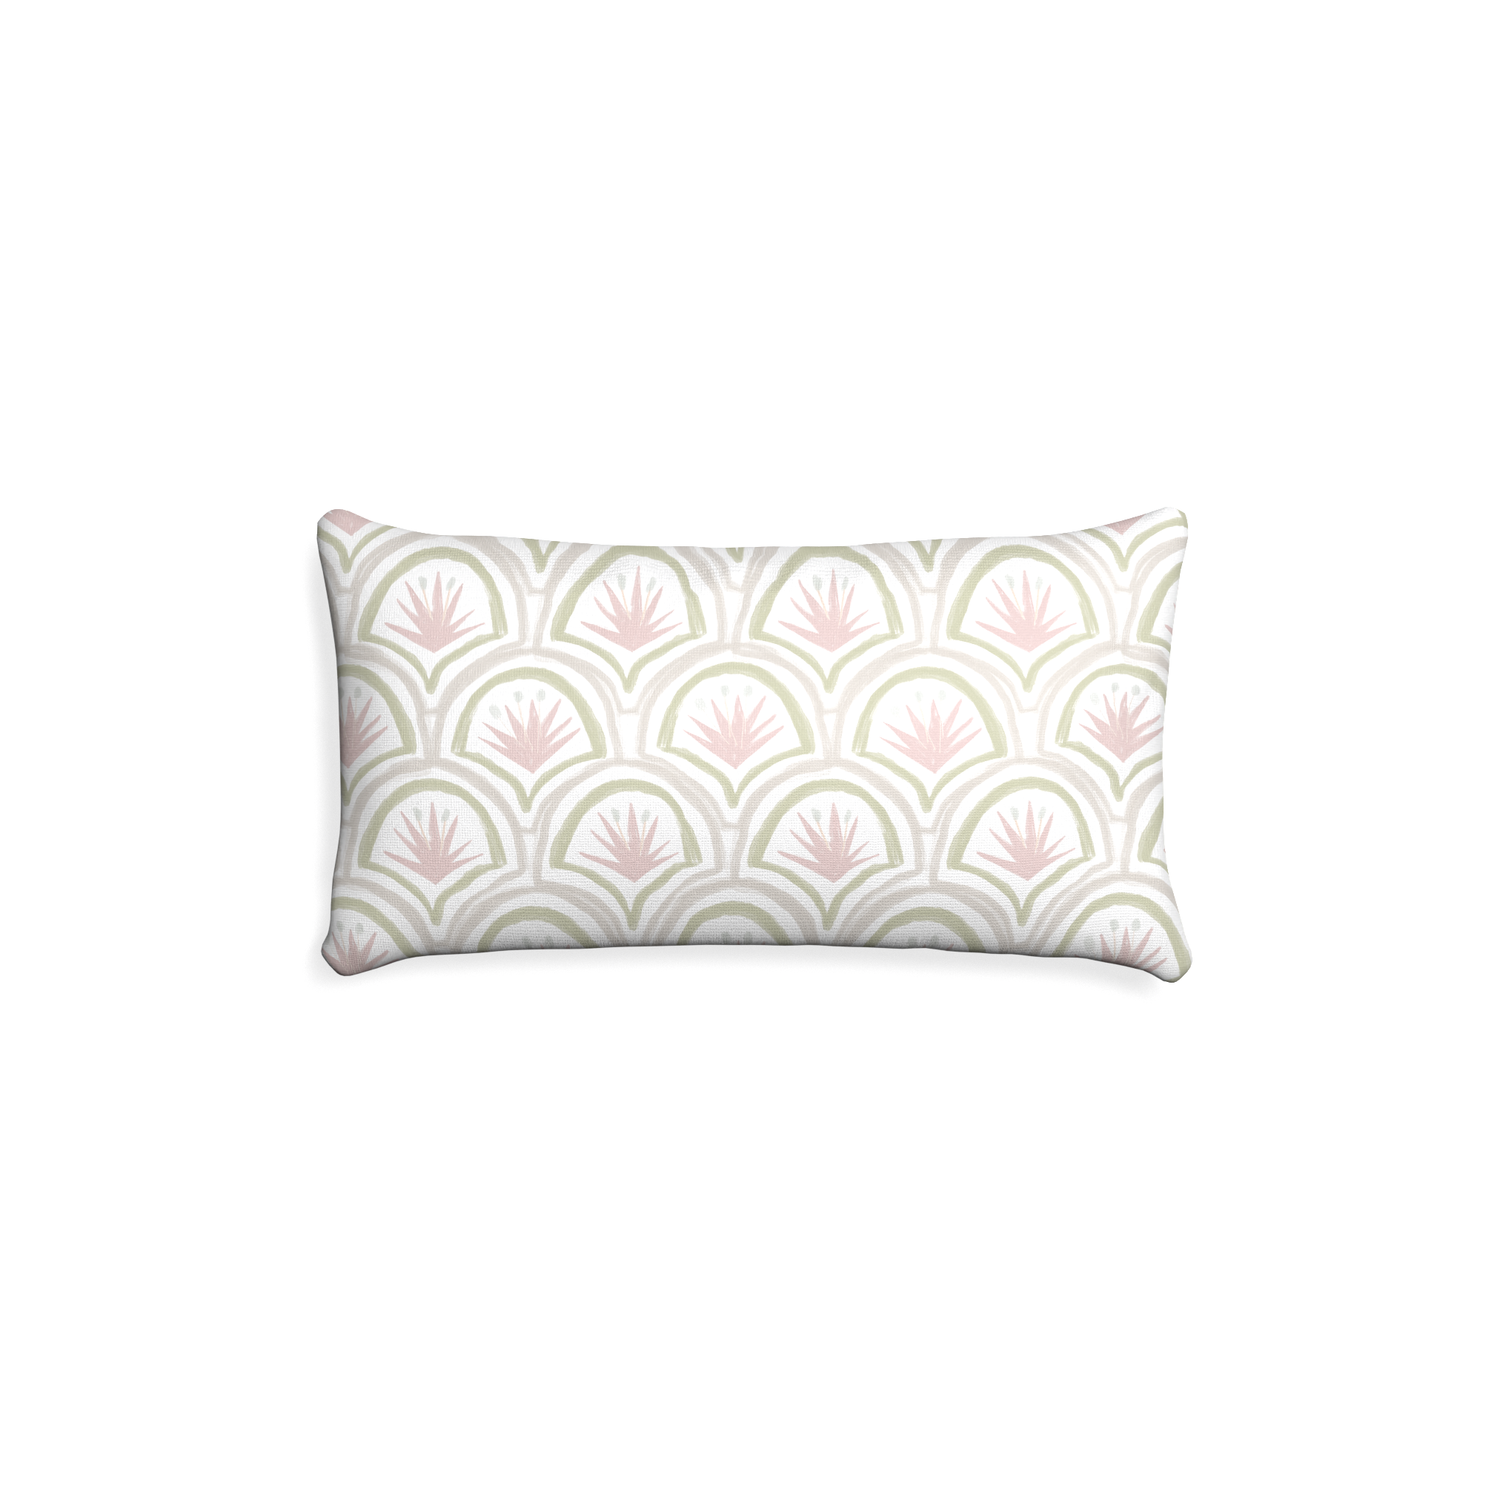 Petite-lumbar thatcher rose custom pink & green palmpillow with none on white background